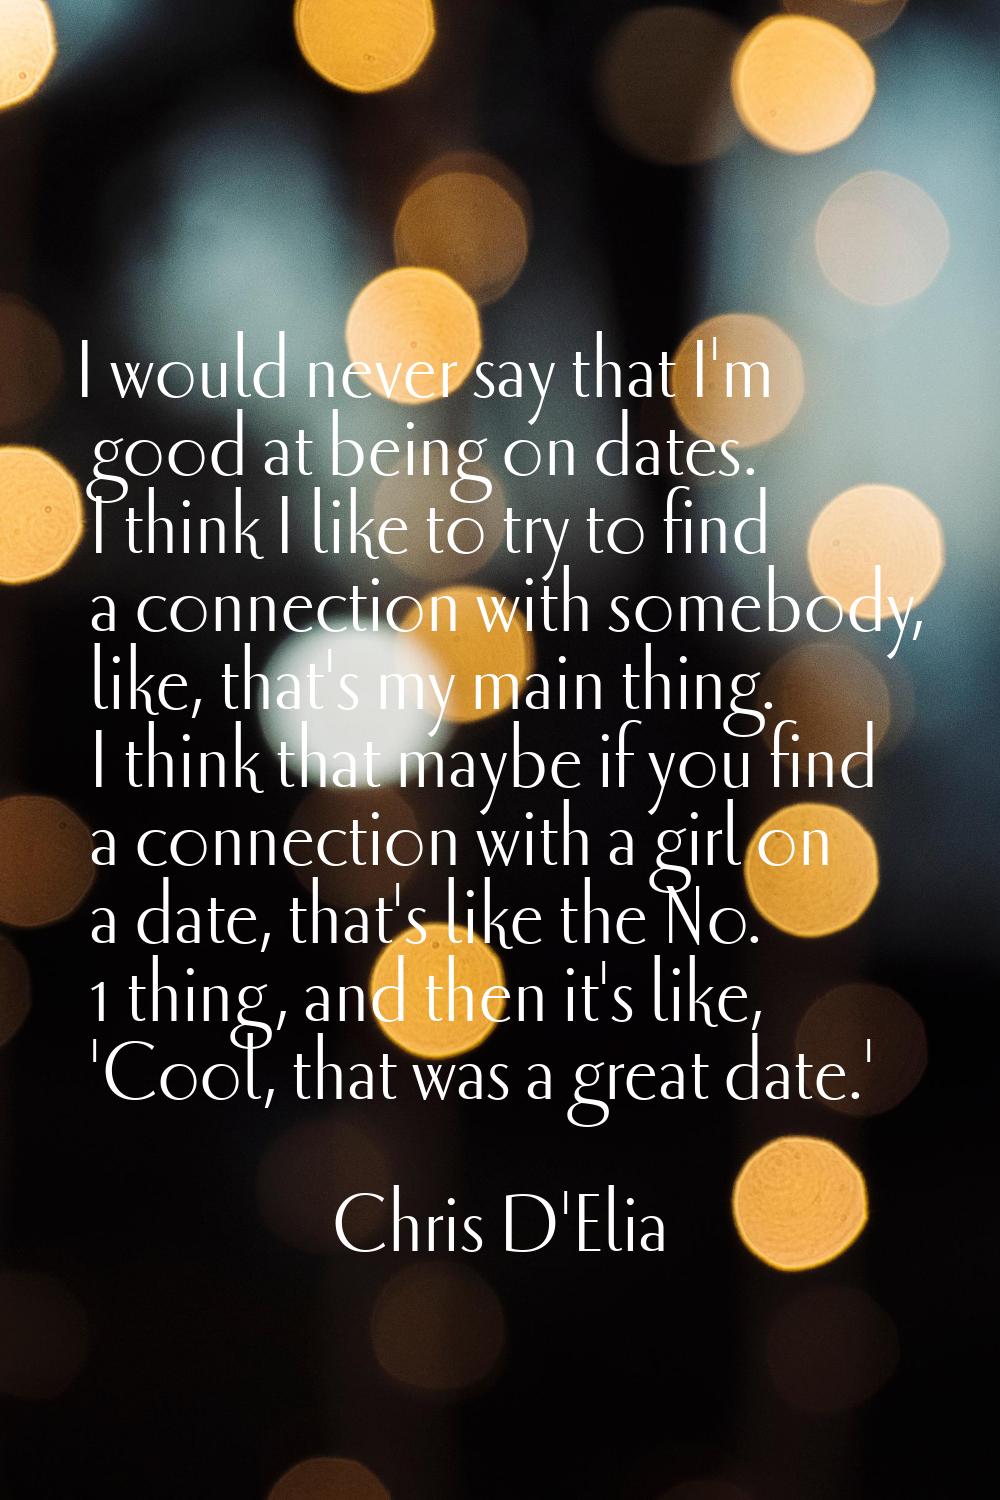 I would never say that I'm good at being on dates. I think I like to try to find a connection with 